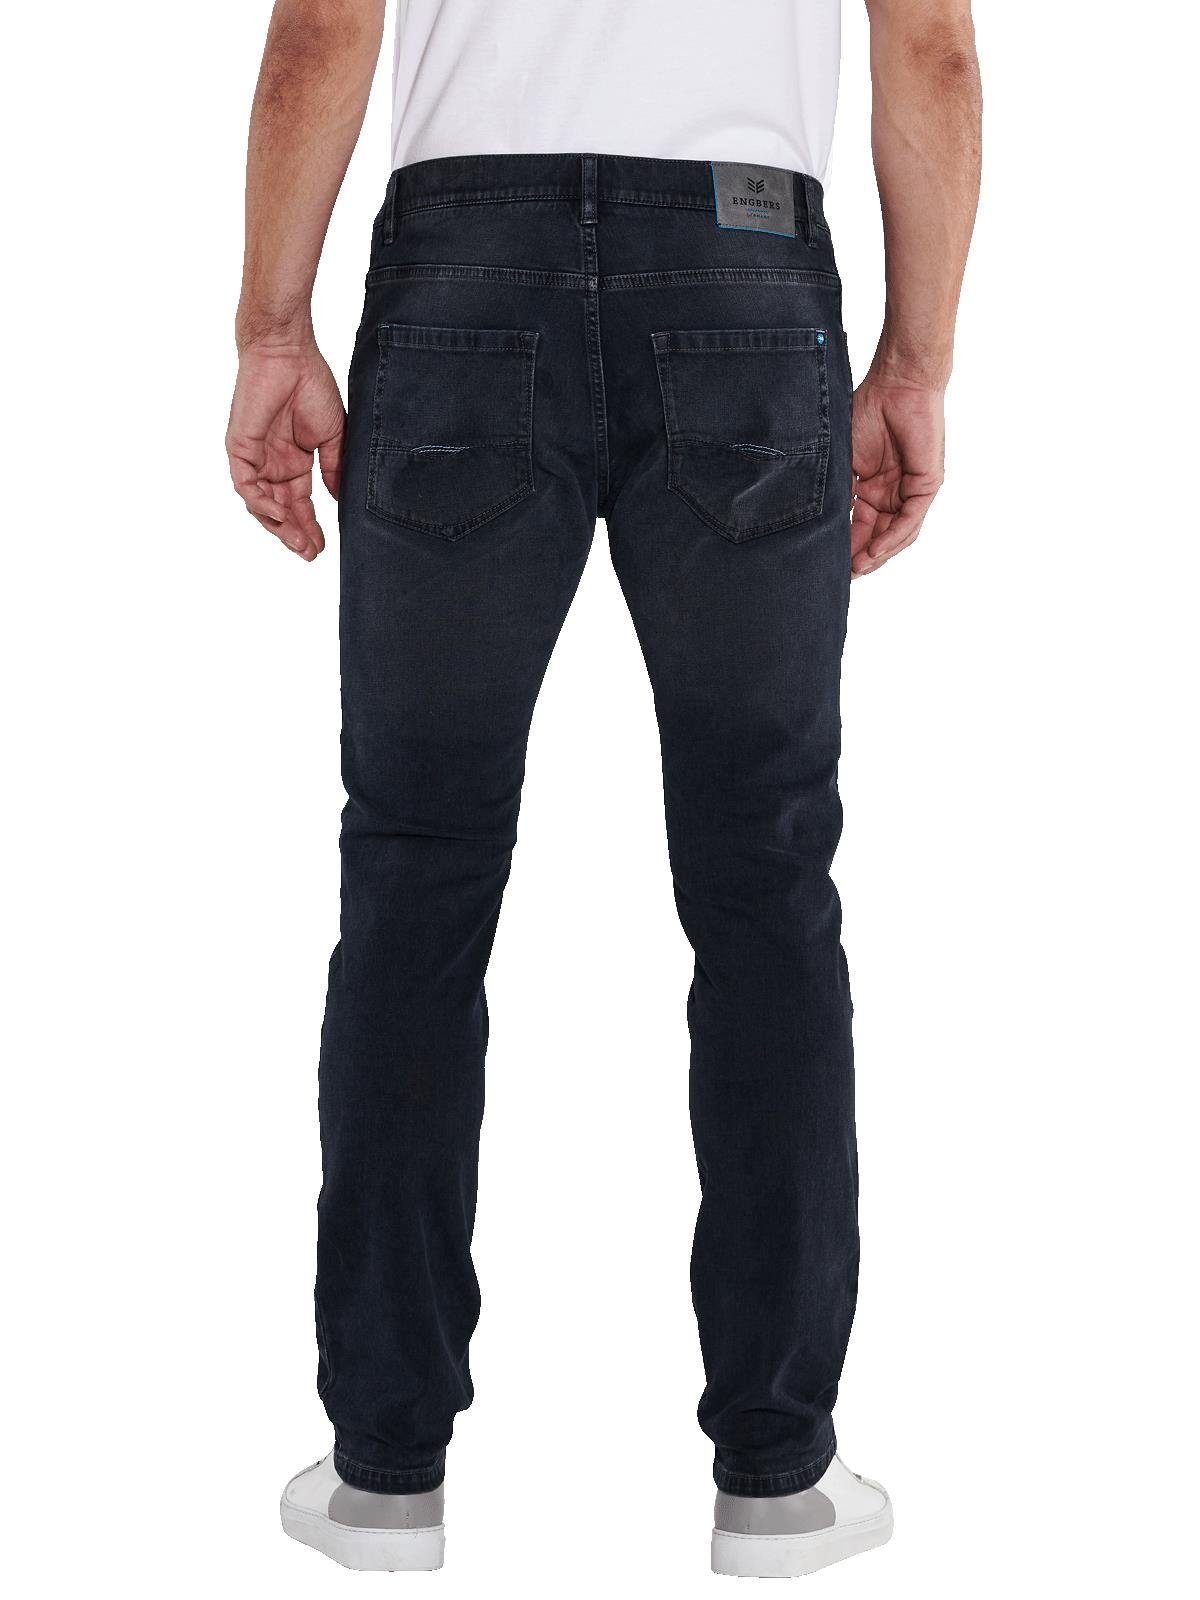 Super-Stretch-Jeans Engbers straight Stretch-Jeans